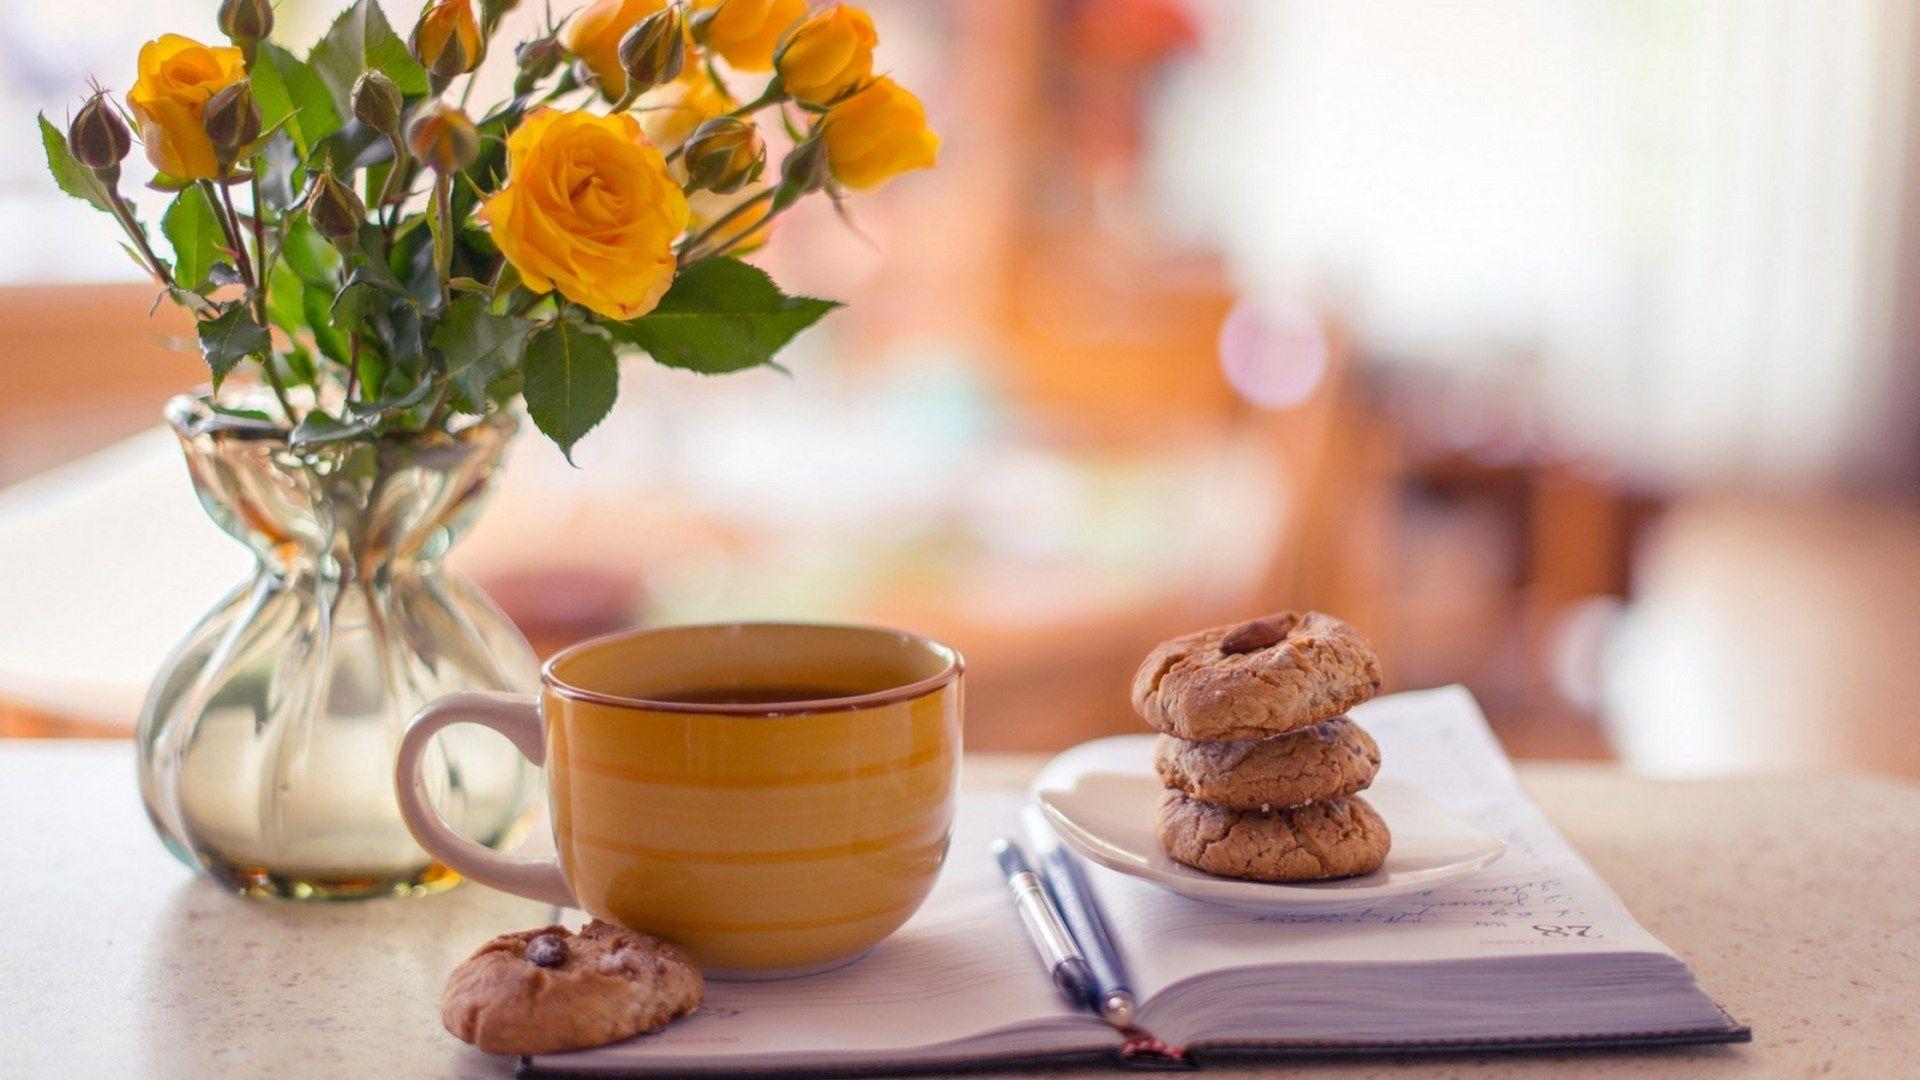 Vase Roses Yellow Notepad Cup Tea Biscuits Spade Flower